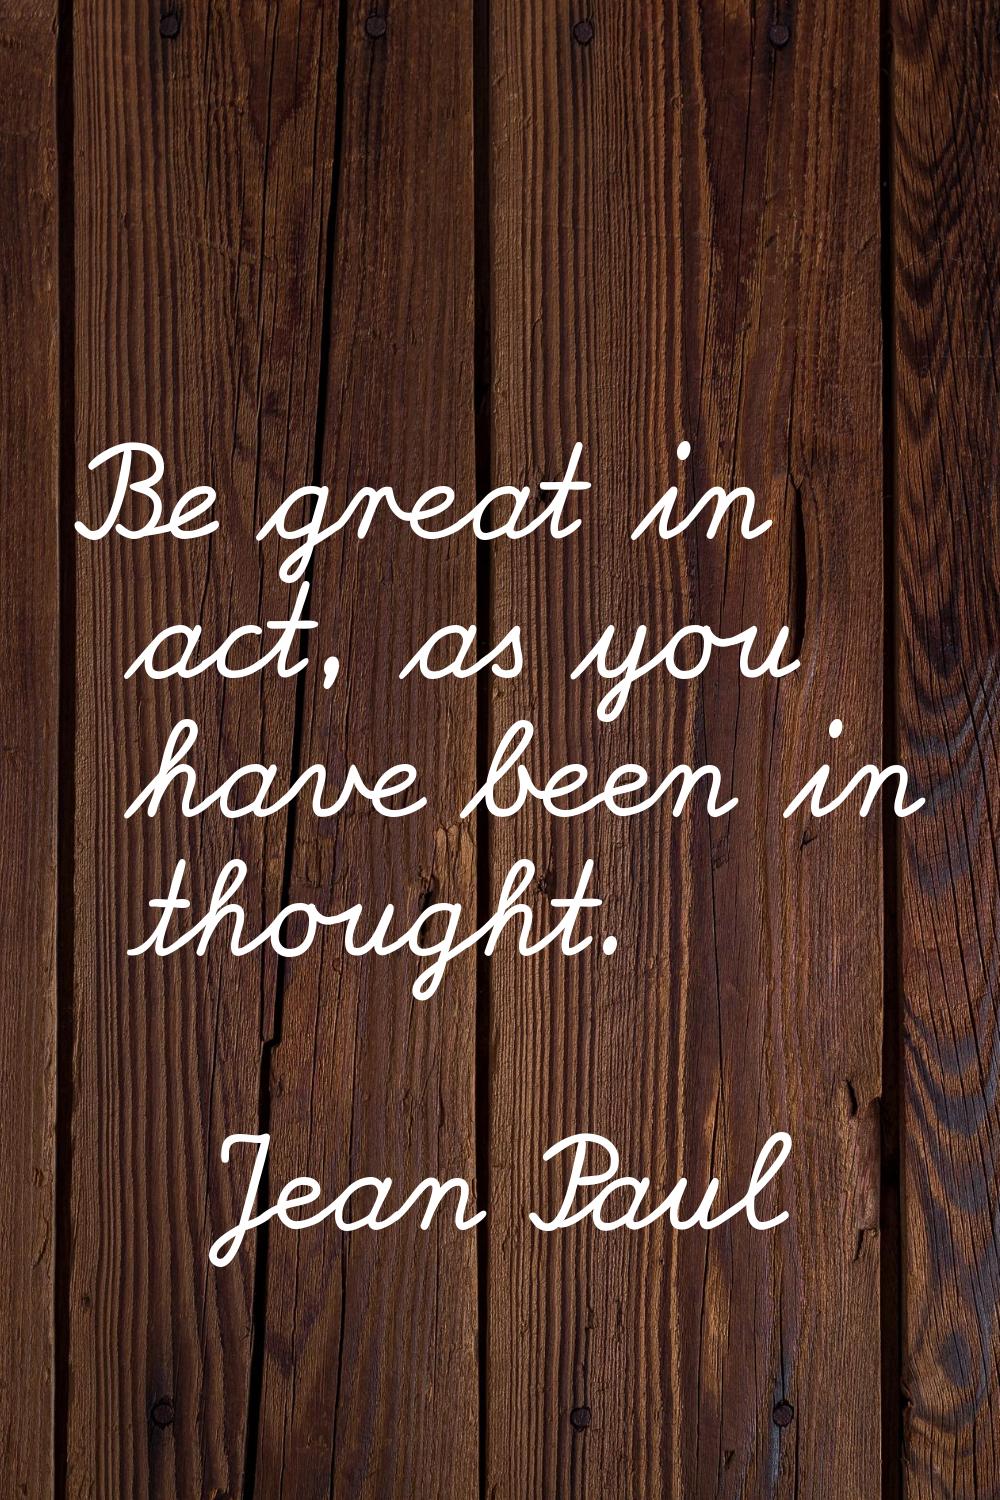 Be great in act, as you have been in thought.